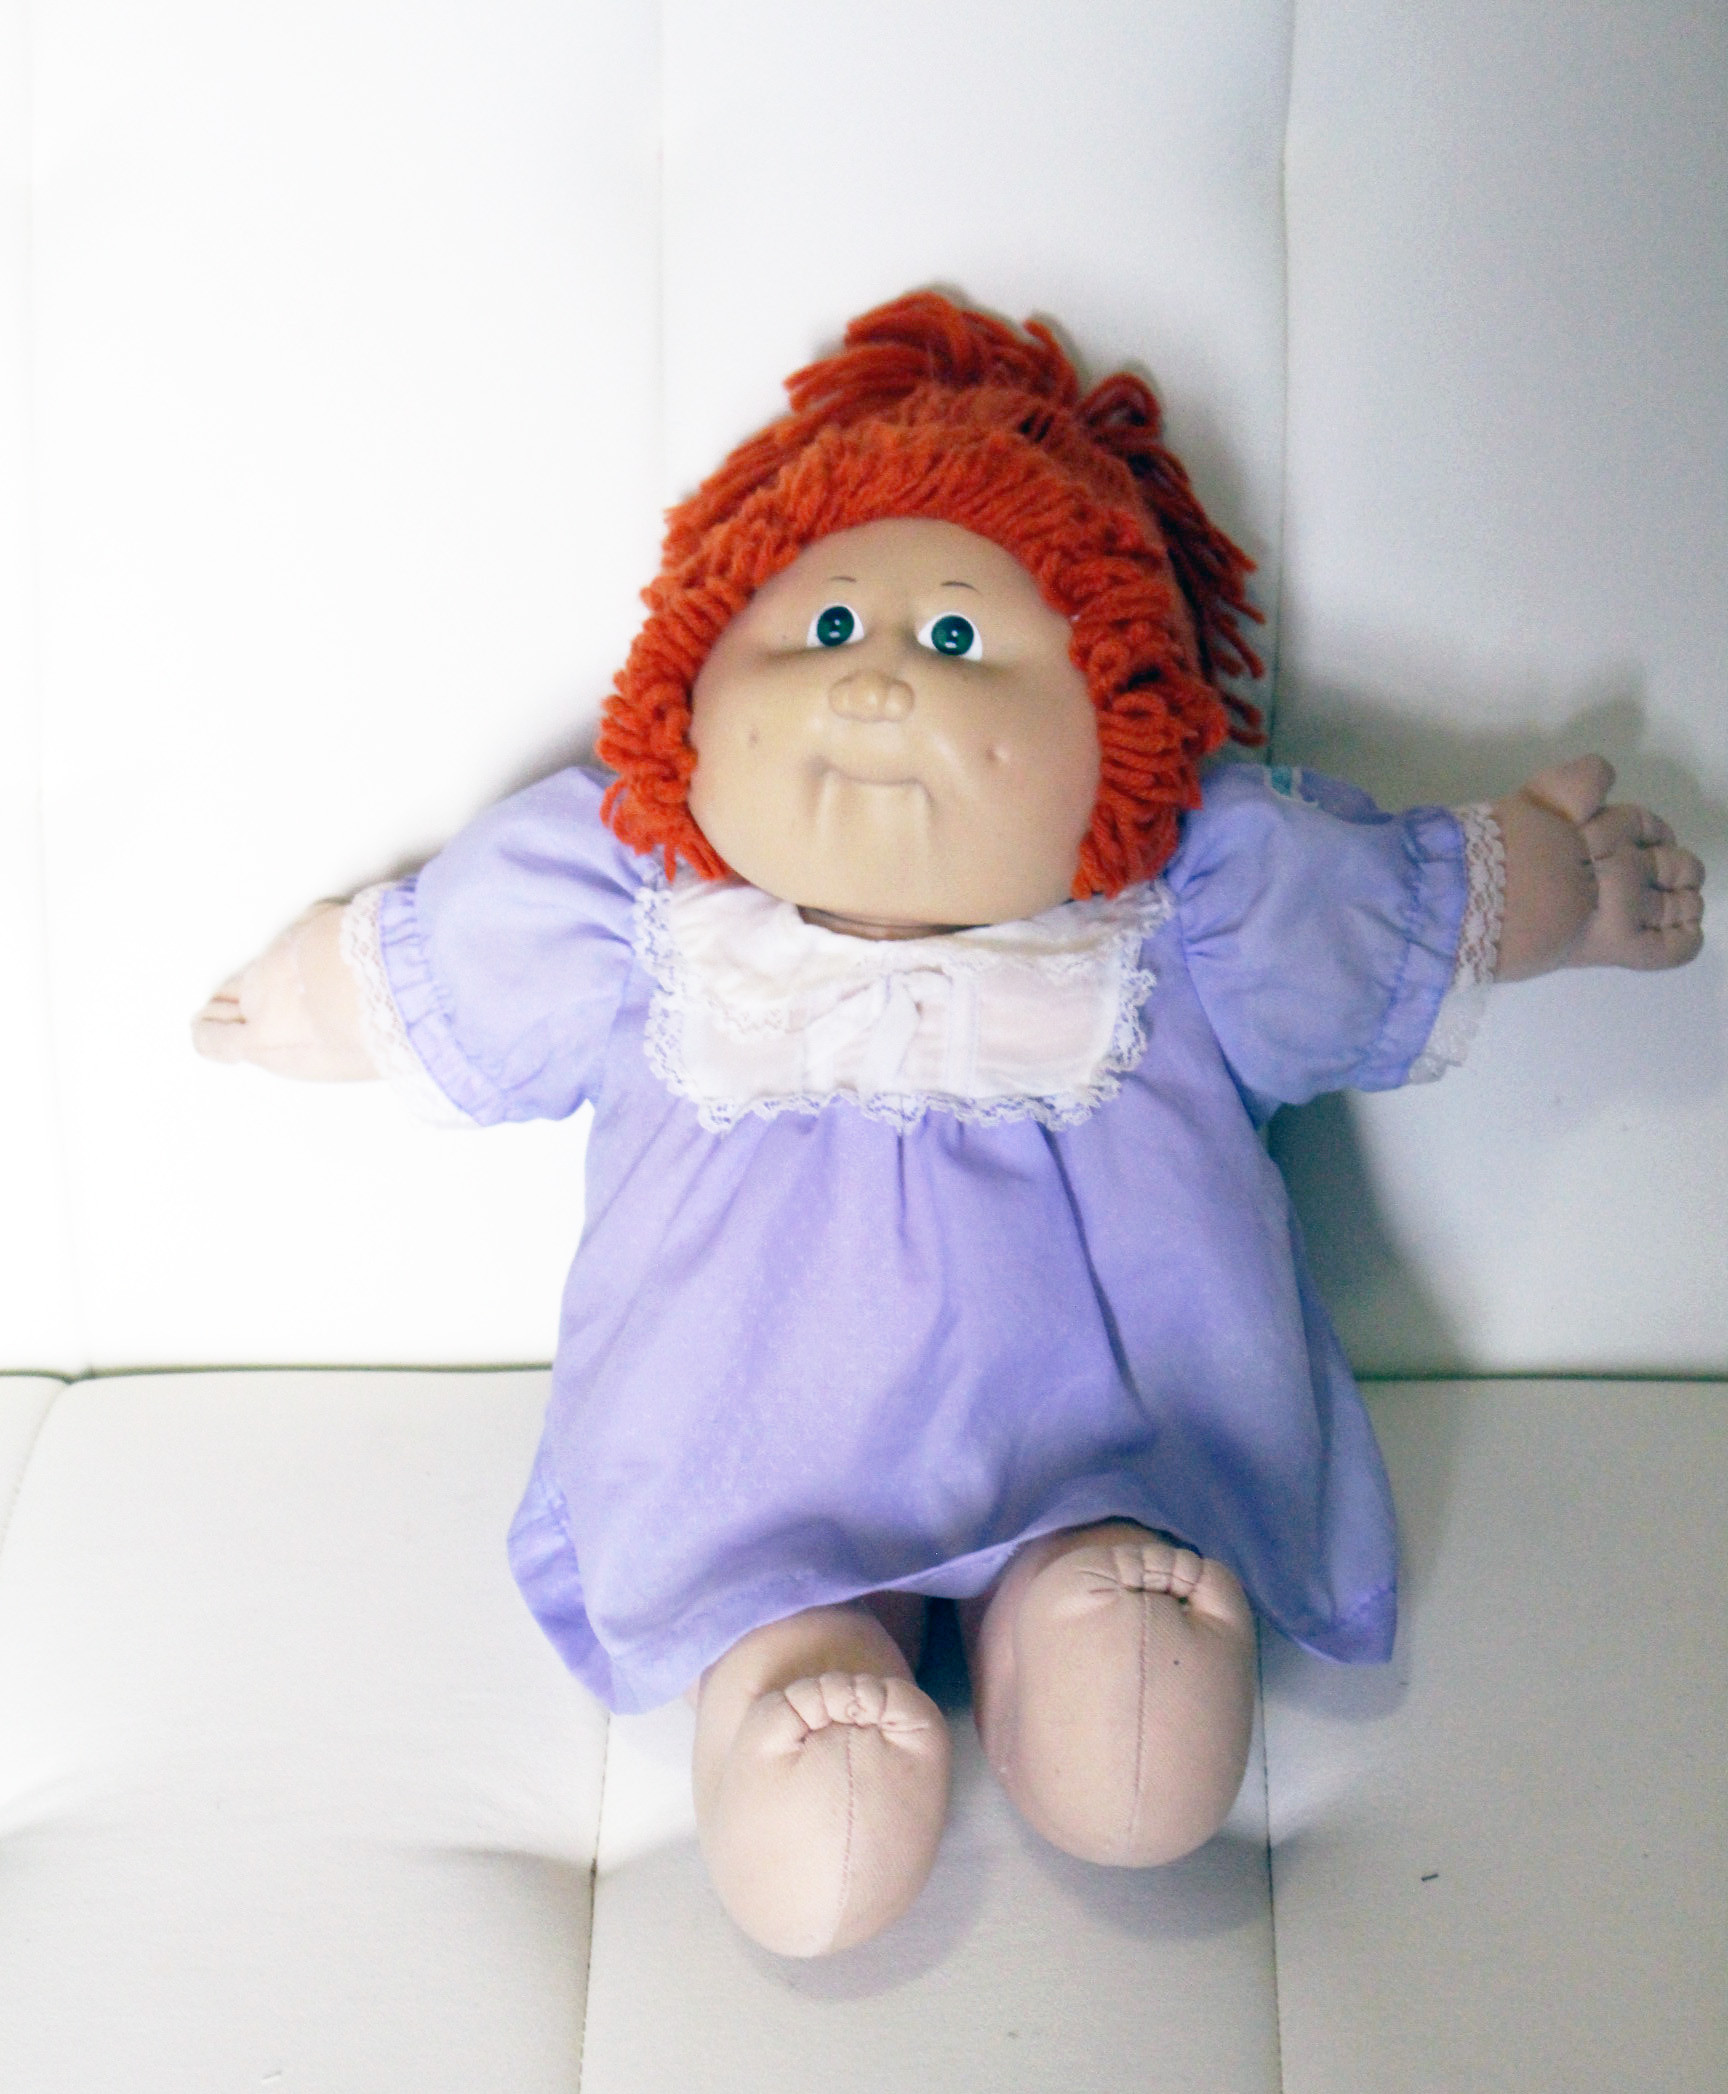 Original Cabbage Patch Kids
 ORIGINAL RED HAIRED CABBAGE PATCH KIDS DOLL XAVIER ROBERTS